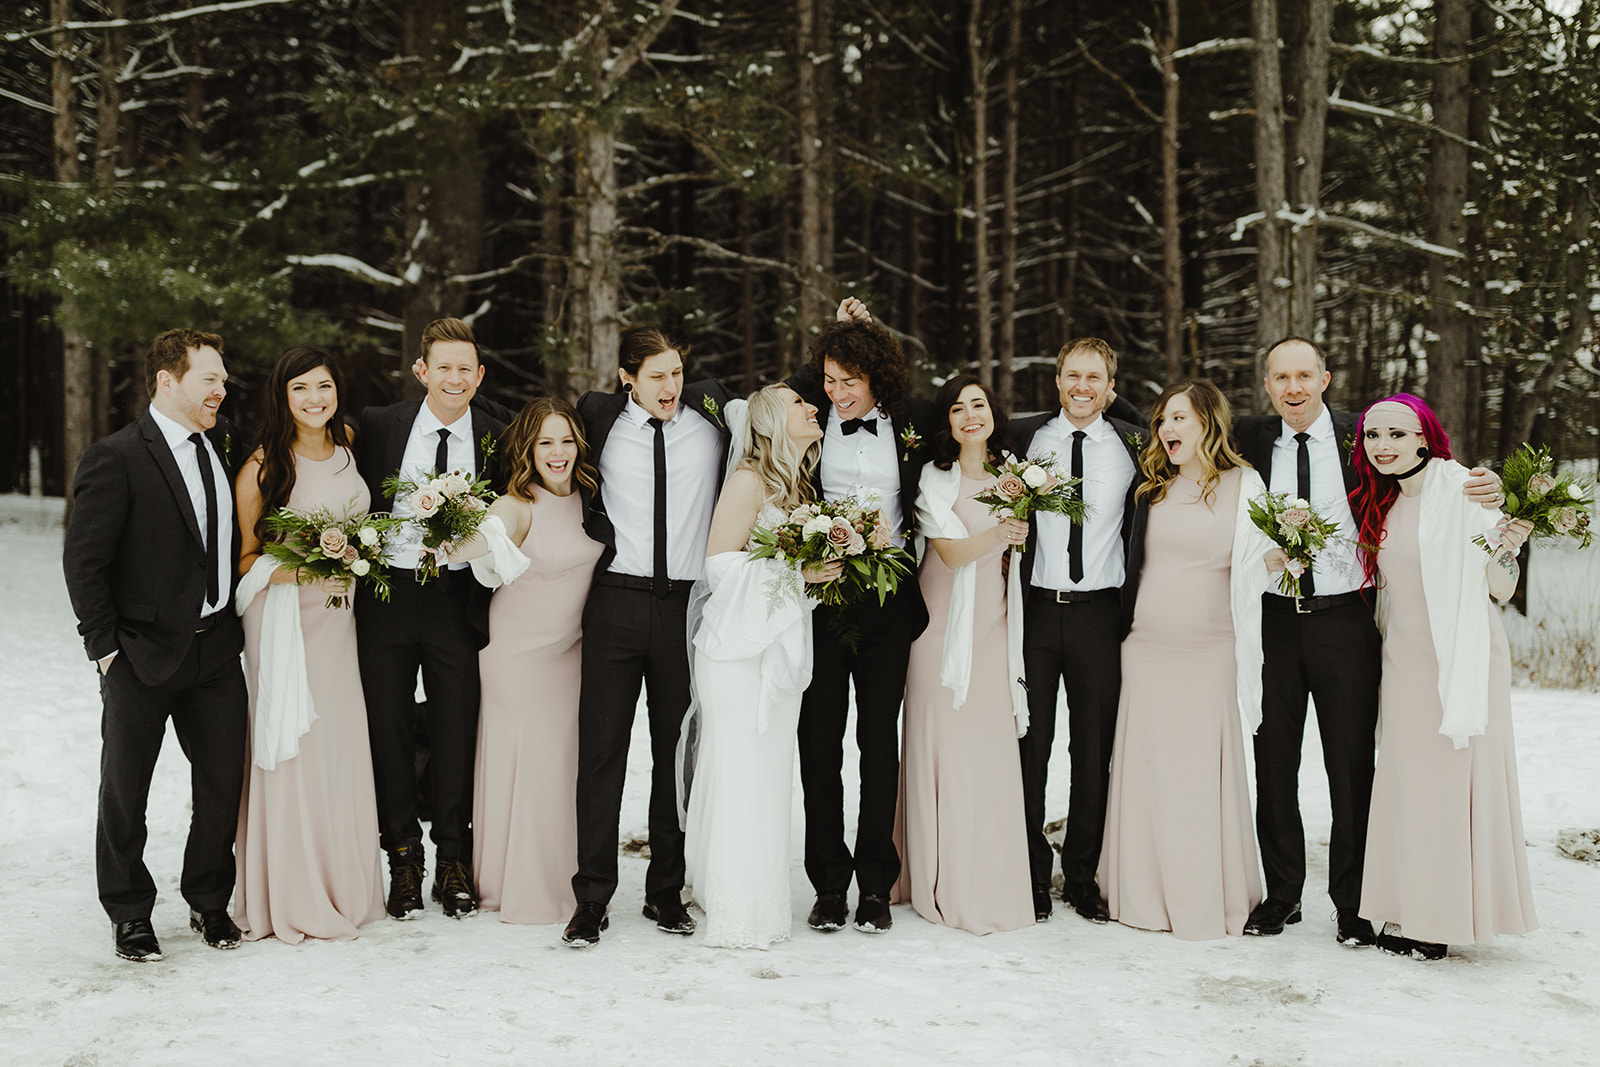 A wedding party smiling in the snow